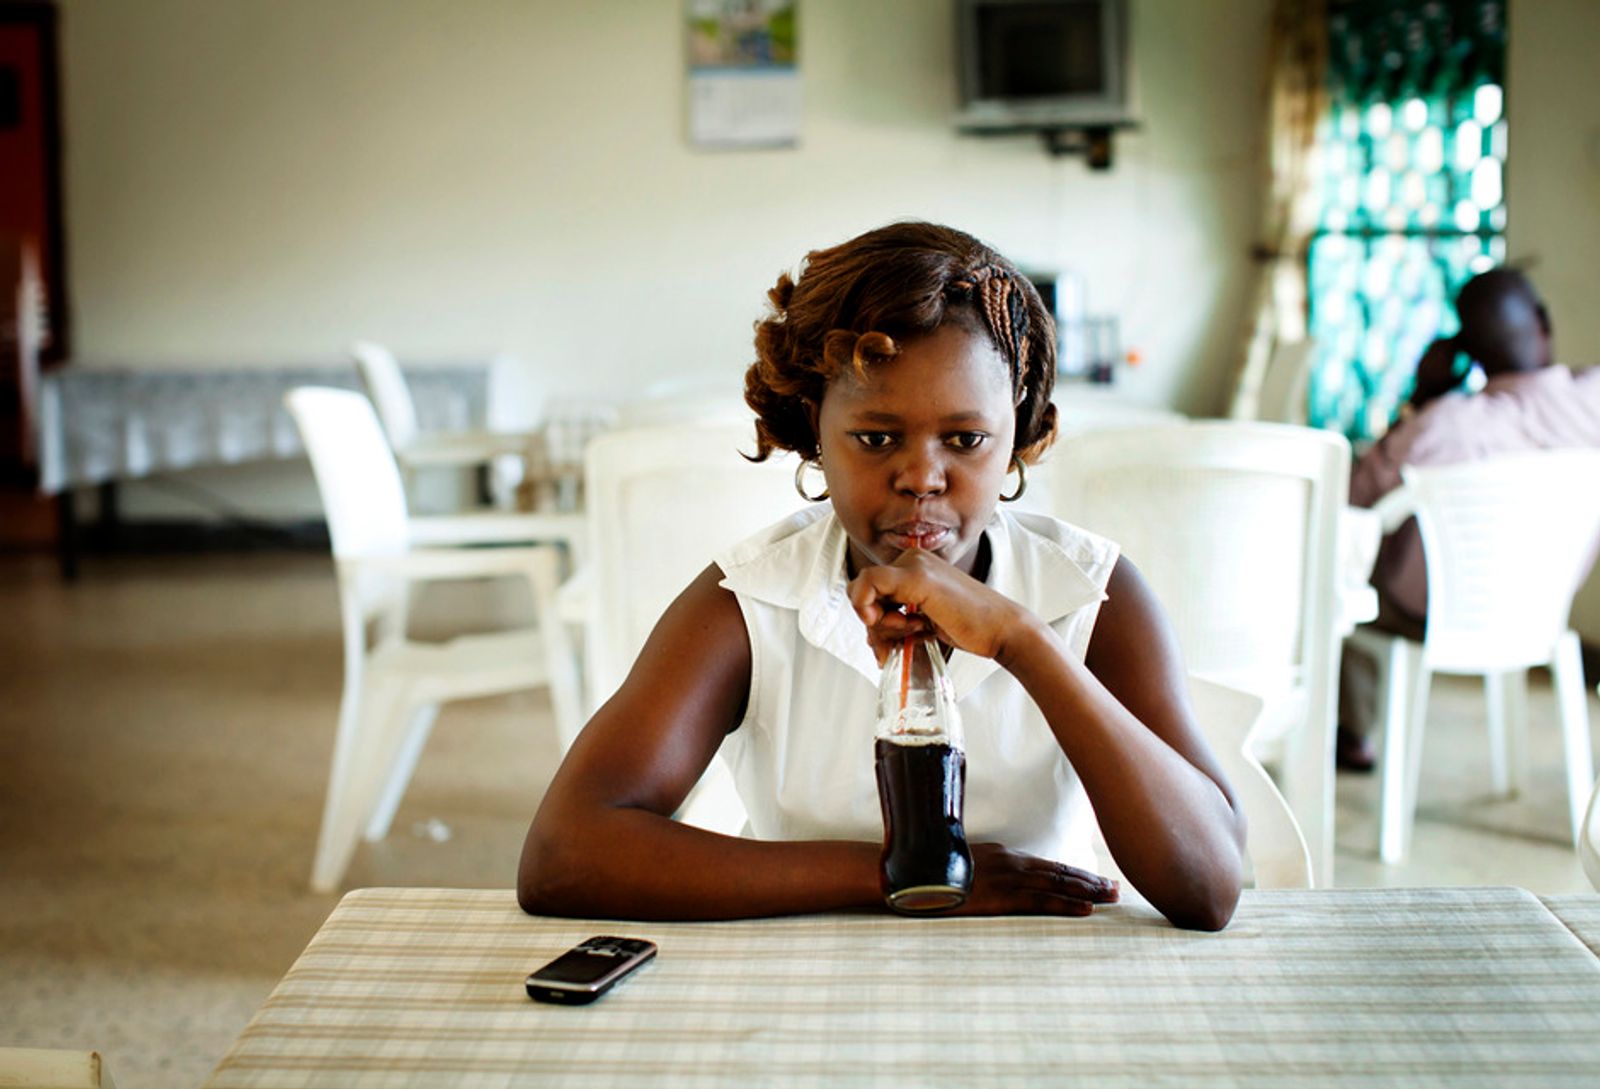 © Anne Ackermann - Lady Sharia, a young musician from Gulu enjoys her soda in a local restaurant.